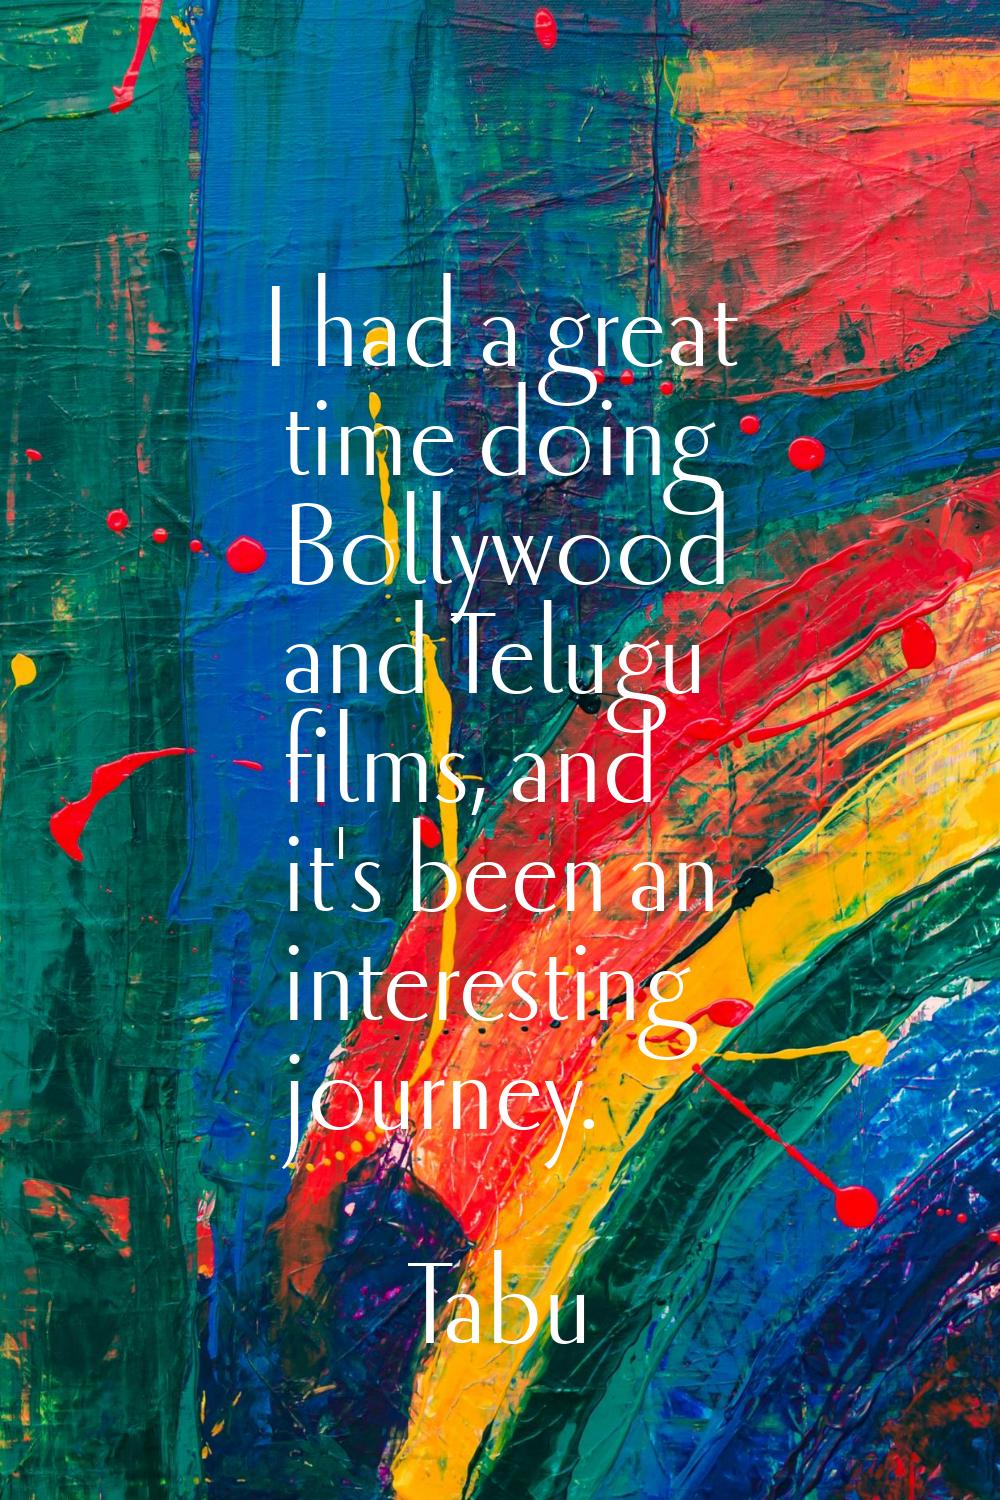 I had a great time doing Bollywood and Telugu films, and it's been an interesting journey.